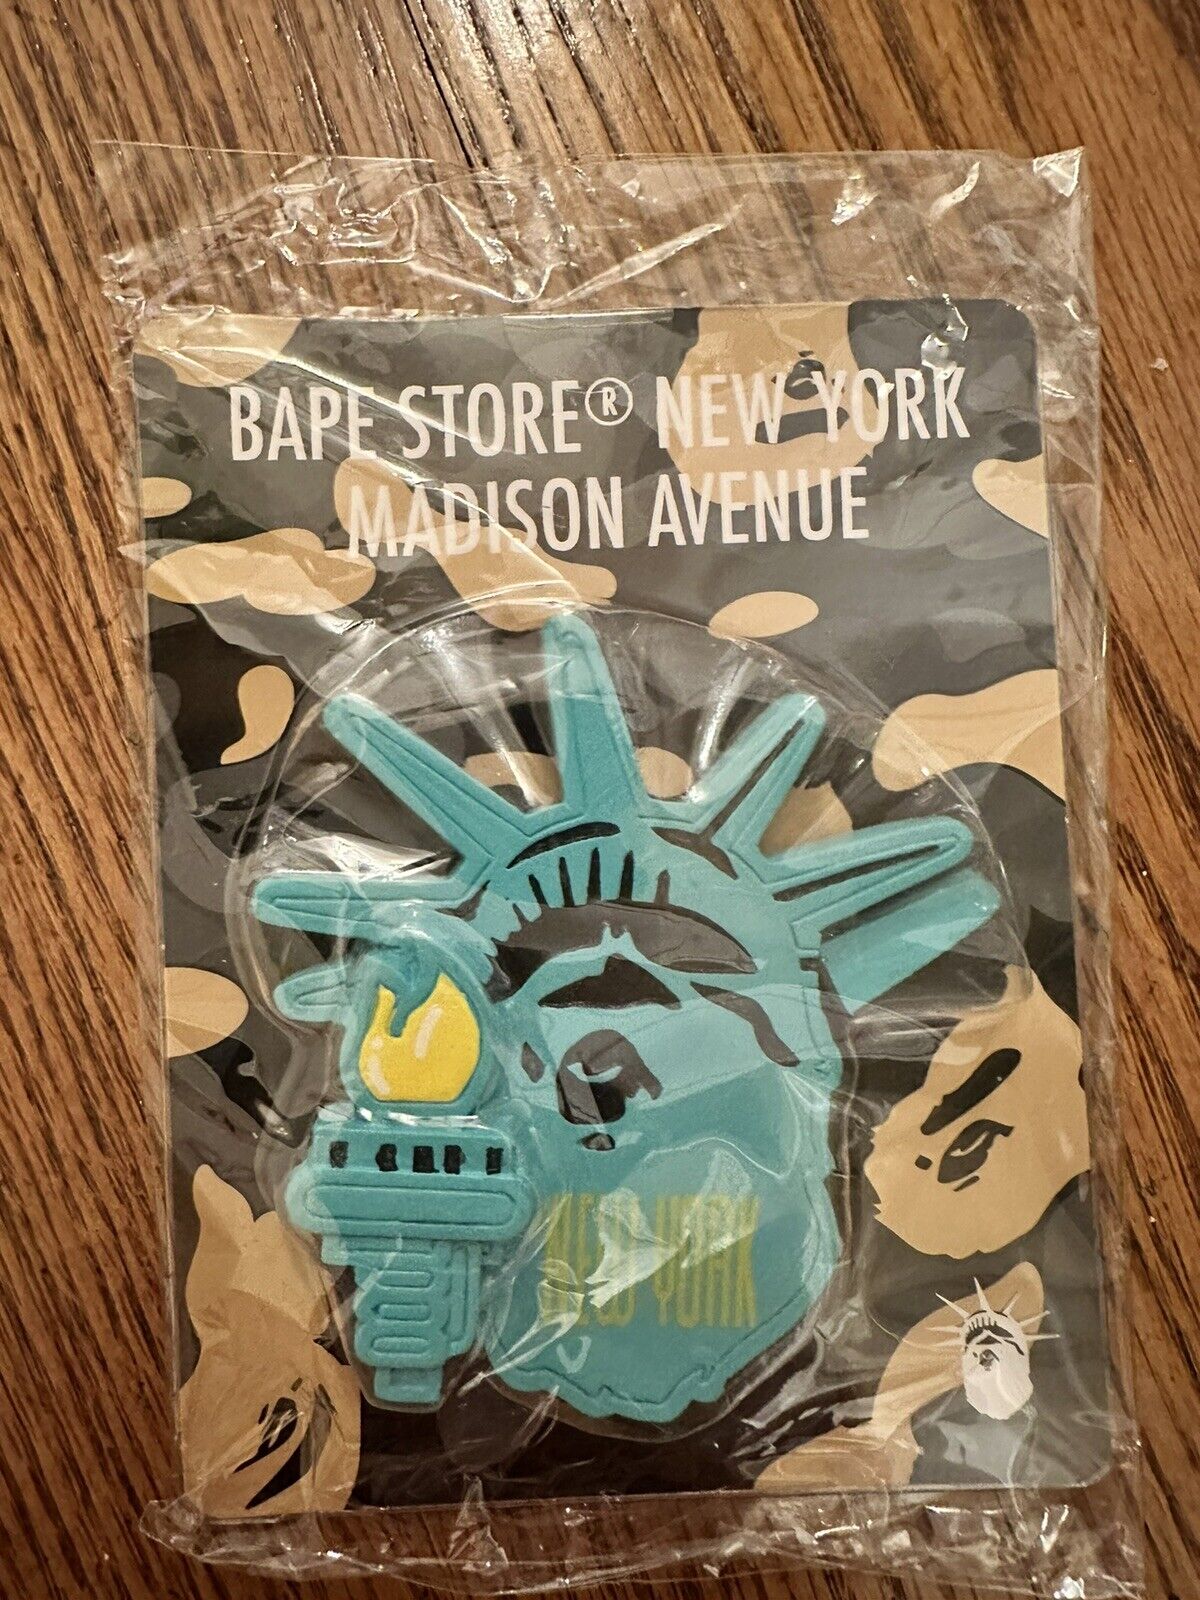 New Bape Magnet A Bathing Ape Magnet NYC Madison Store. Statue Of Liberty. Rare.